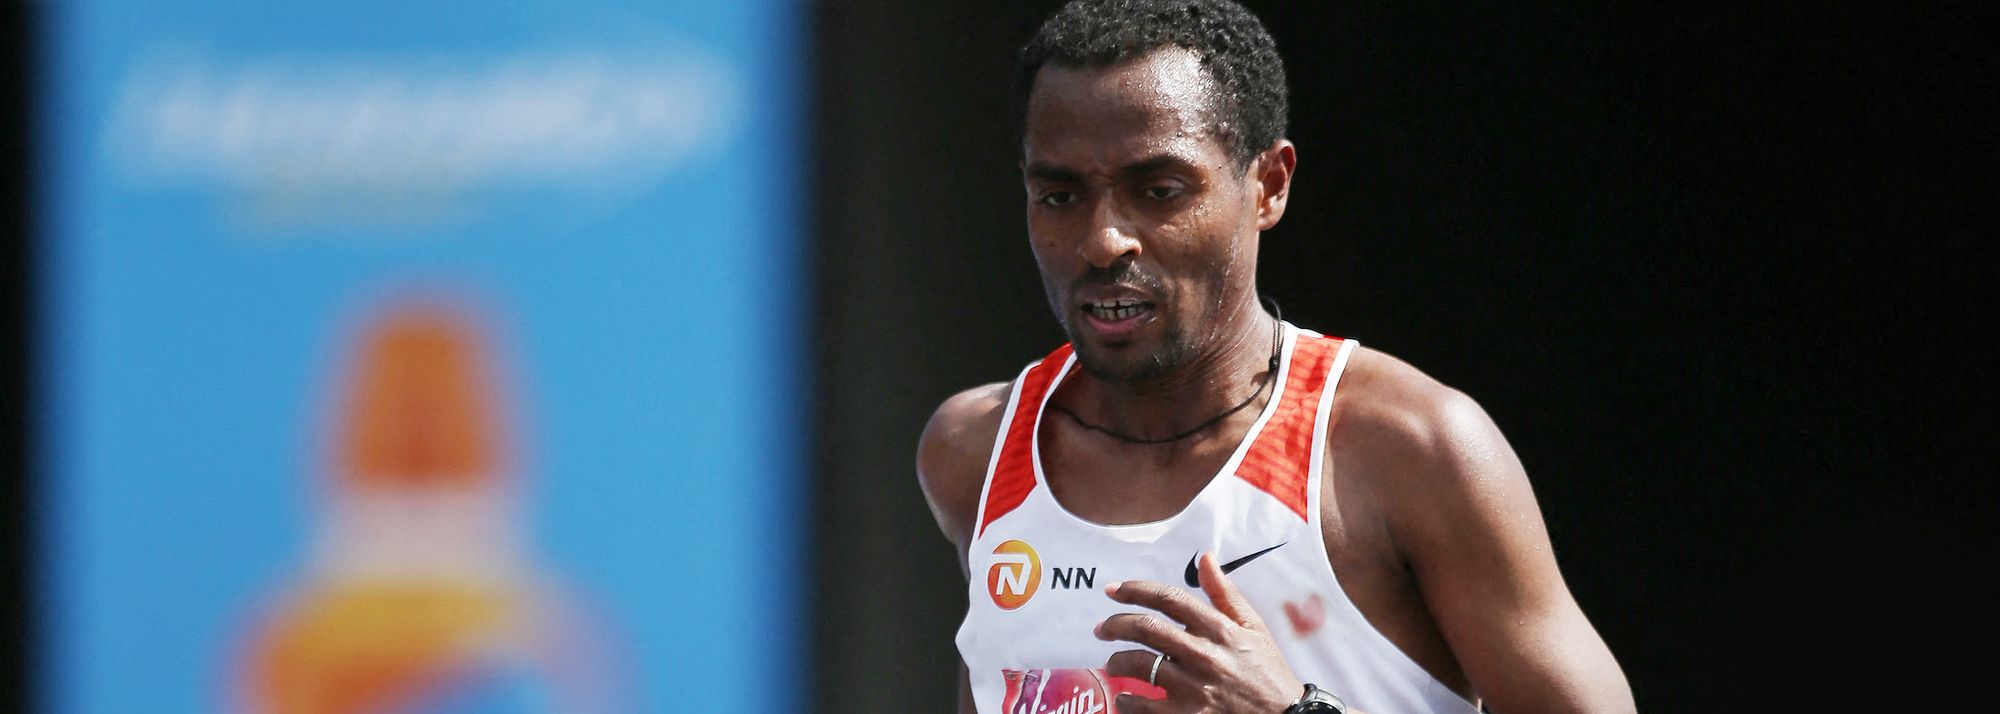 Led by Kenenisa Bekele, the elite field features 12 men with lifetime bests faster than 2:06